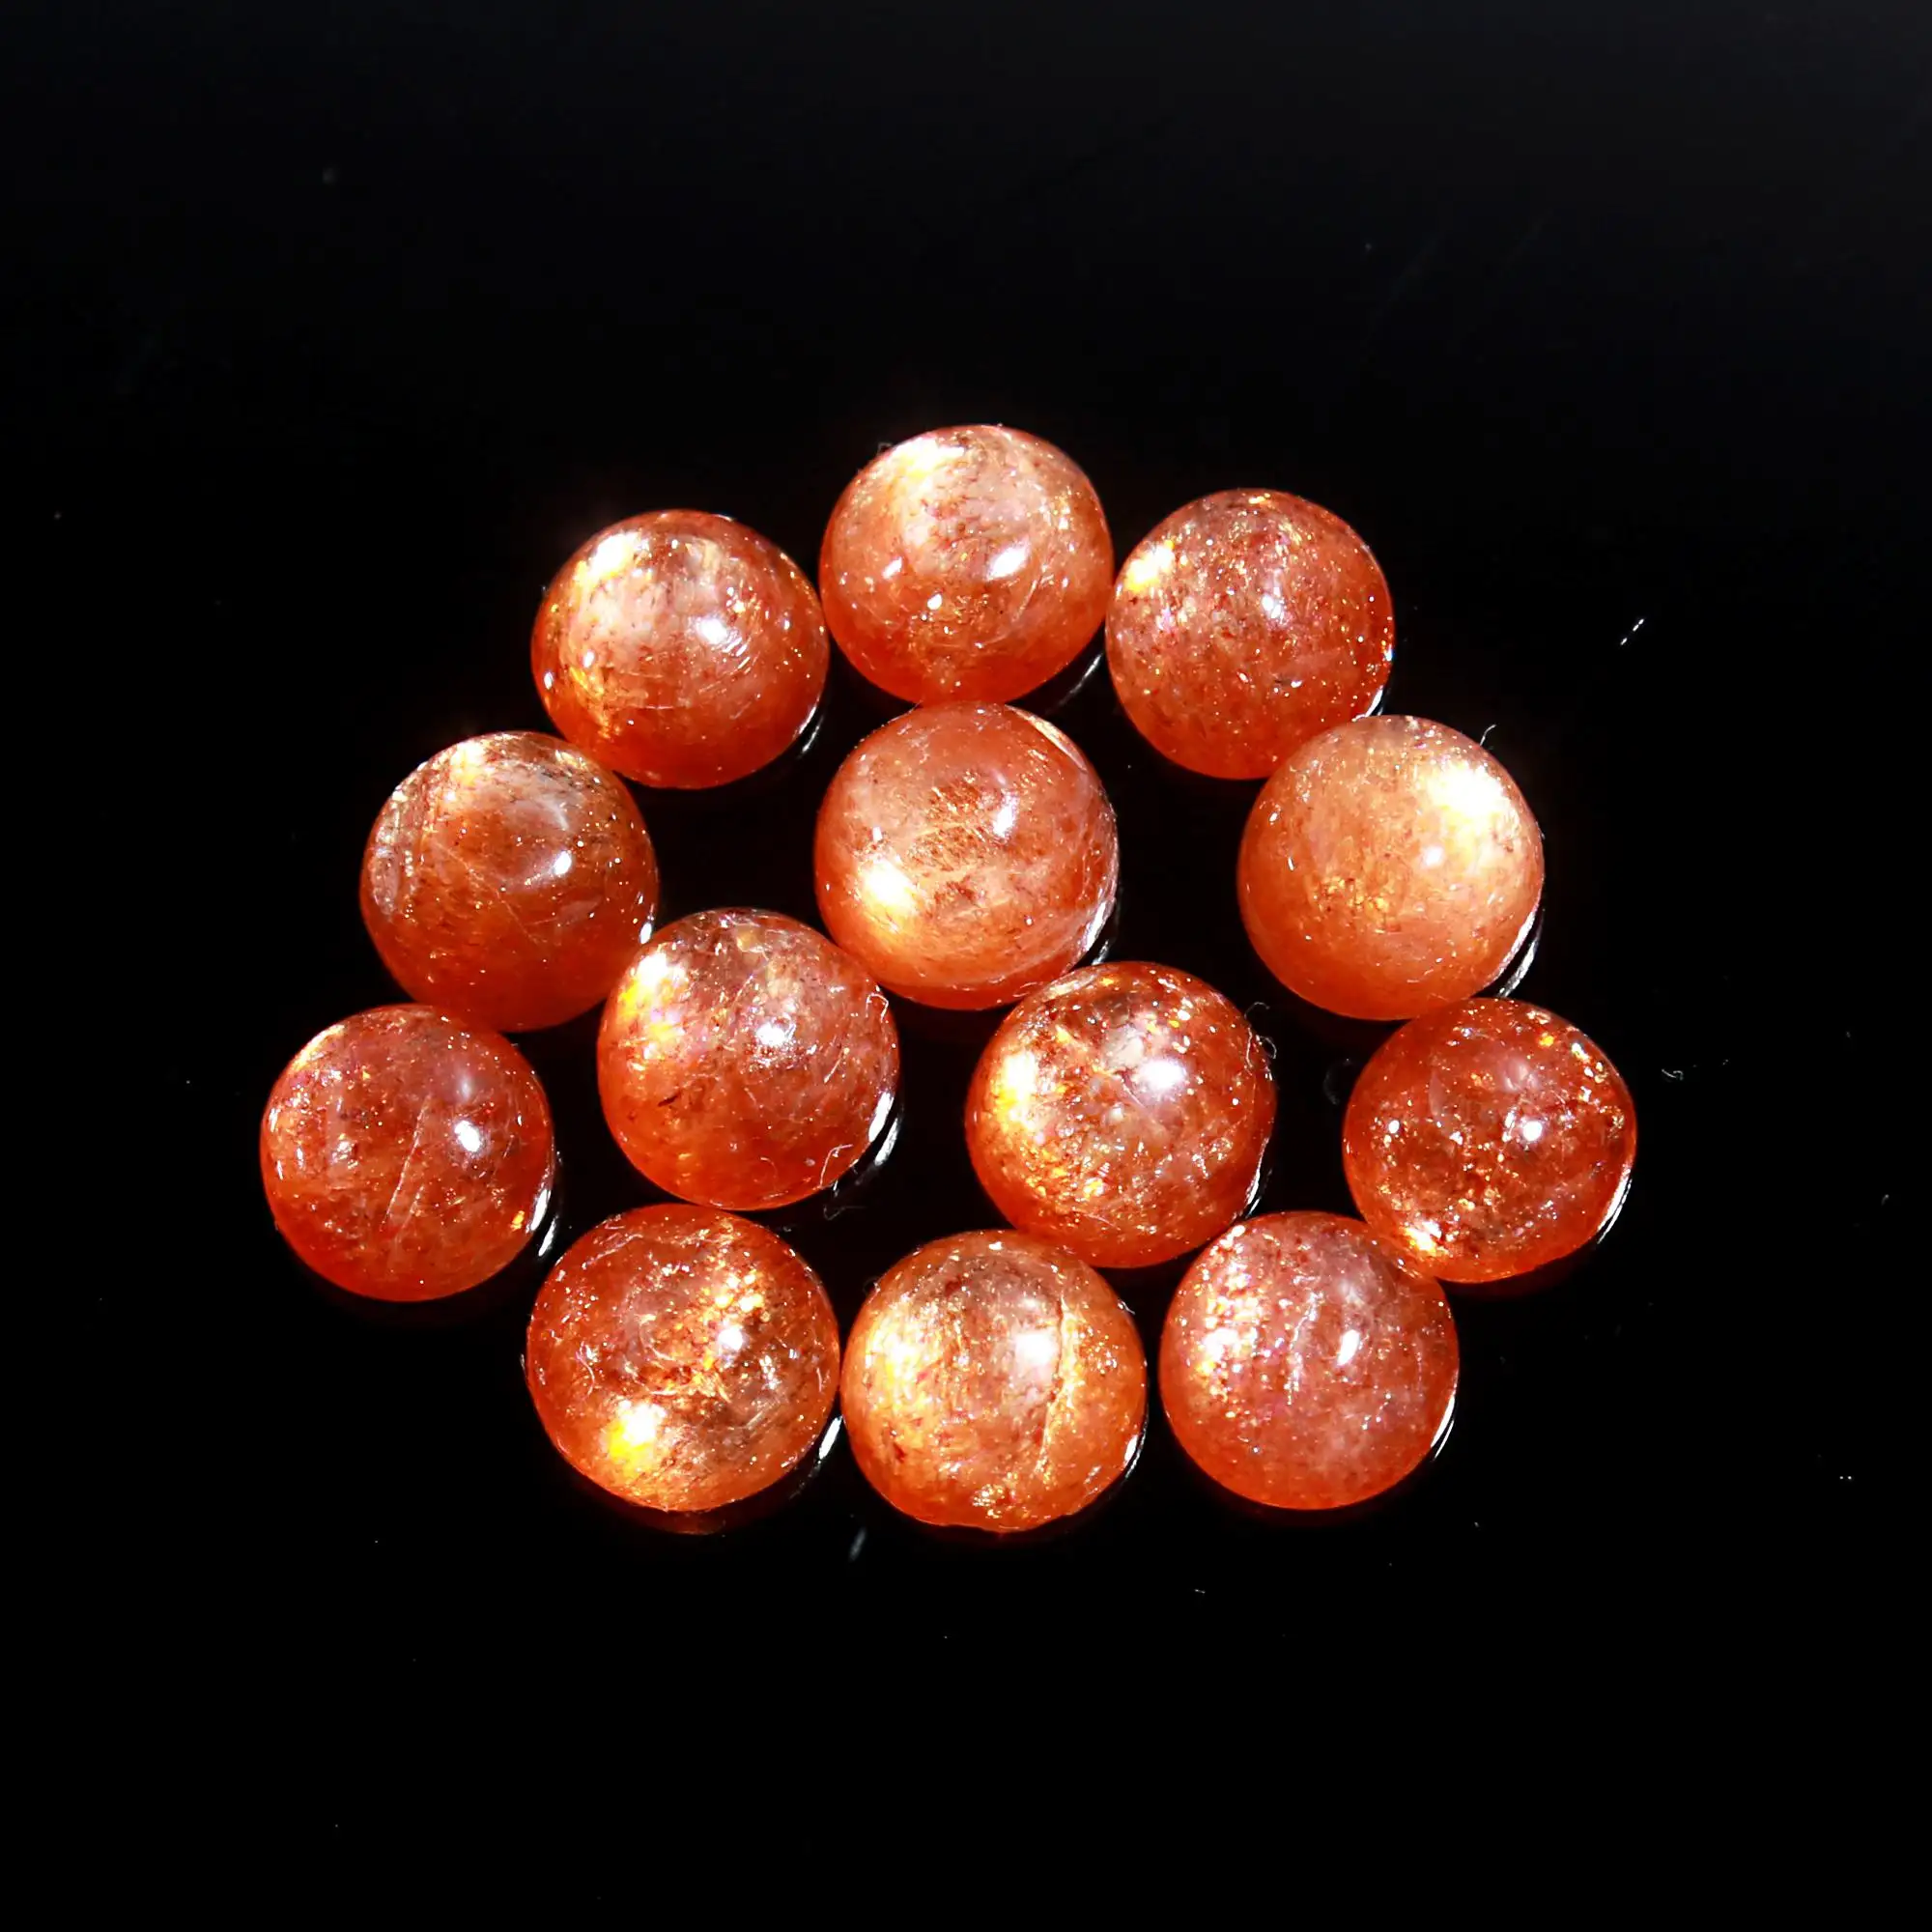 Natural Ball Shape Loose Sunstone For Jewelry Making 4 / 5 /6 /7/ 8/ 9 mm Cabochon Cut Loose Round Shape Free Form Sunstone